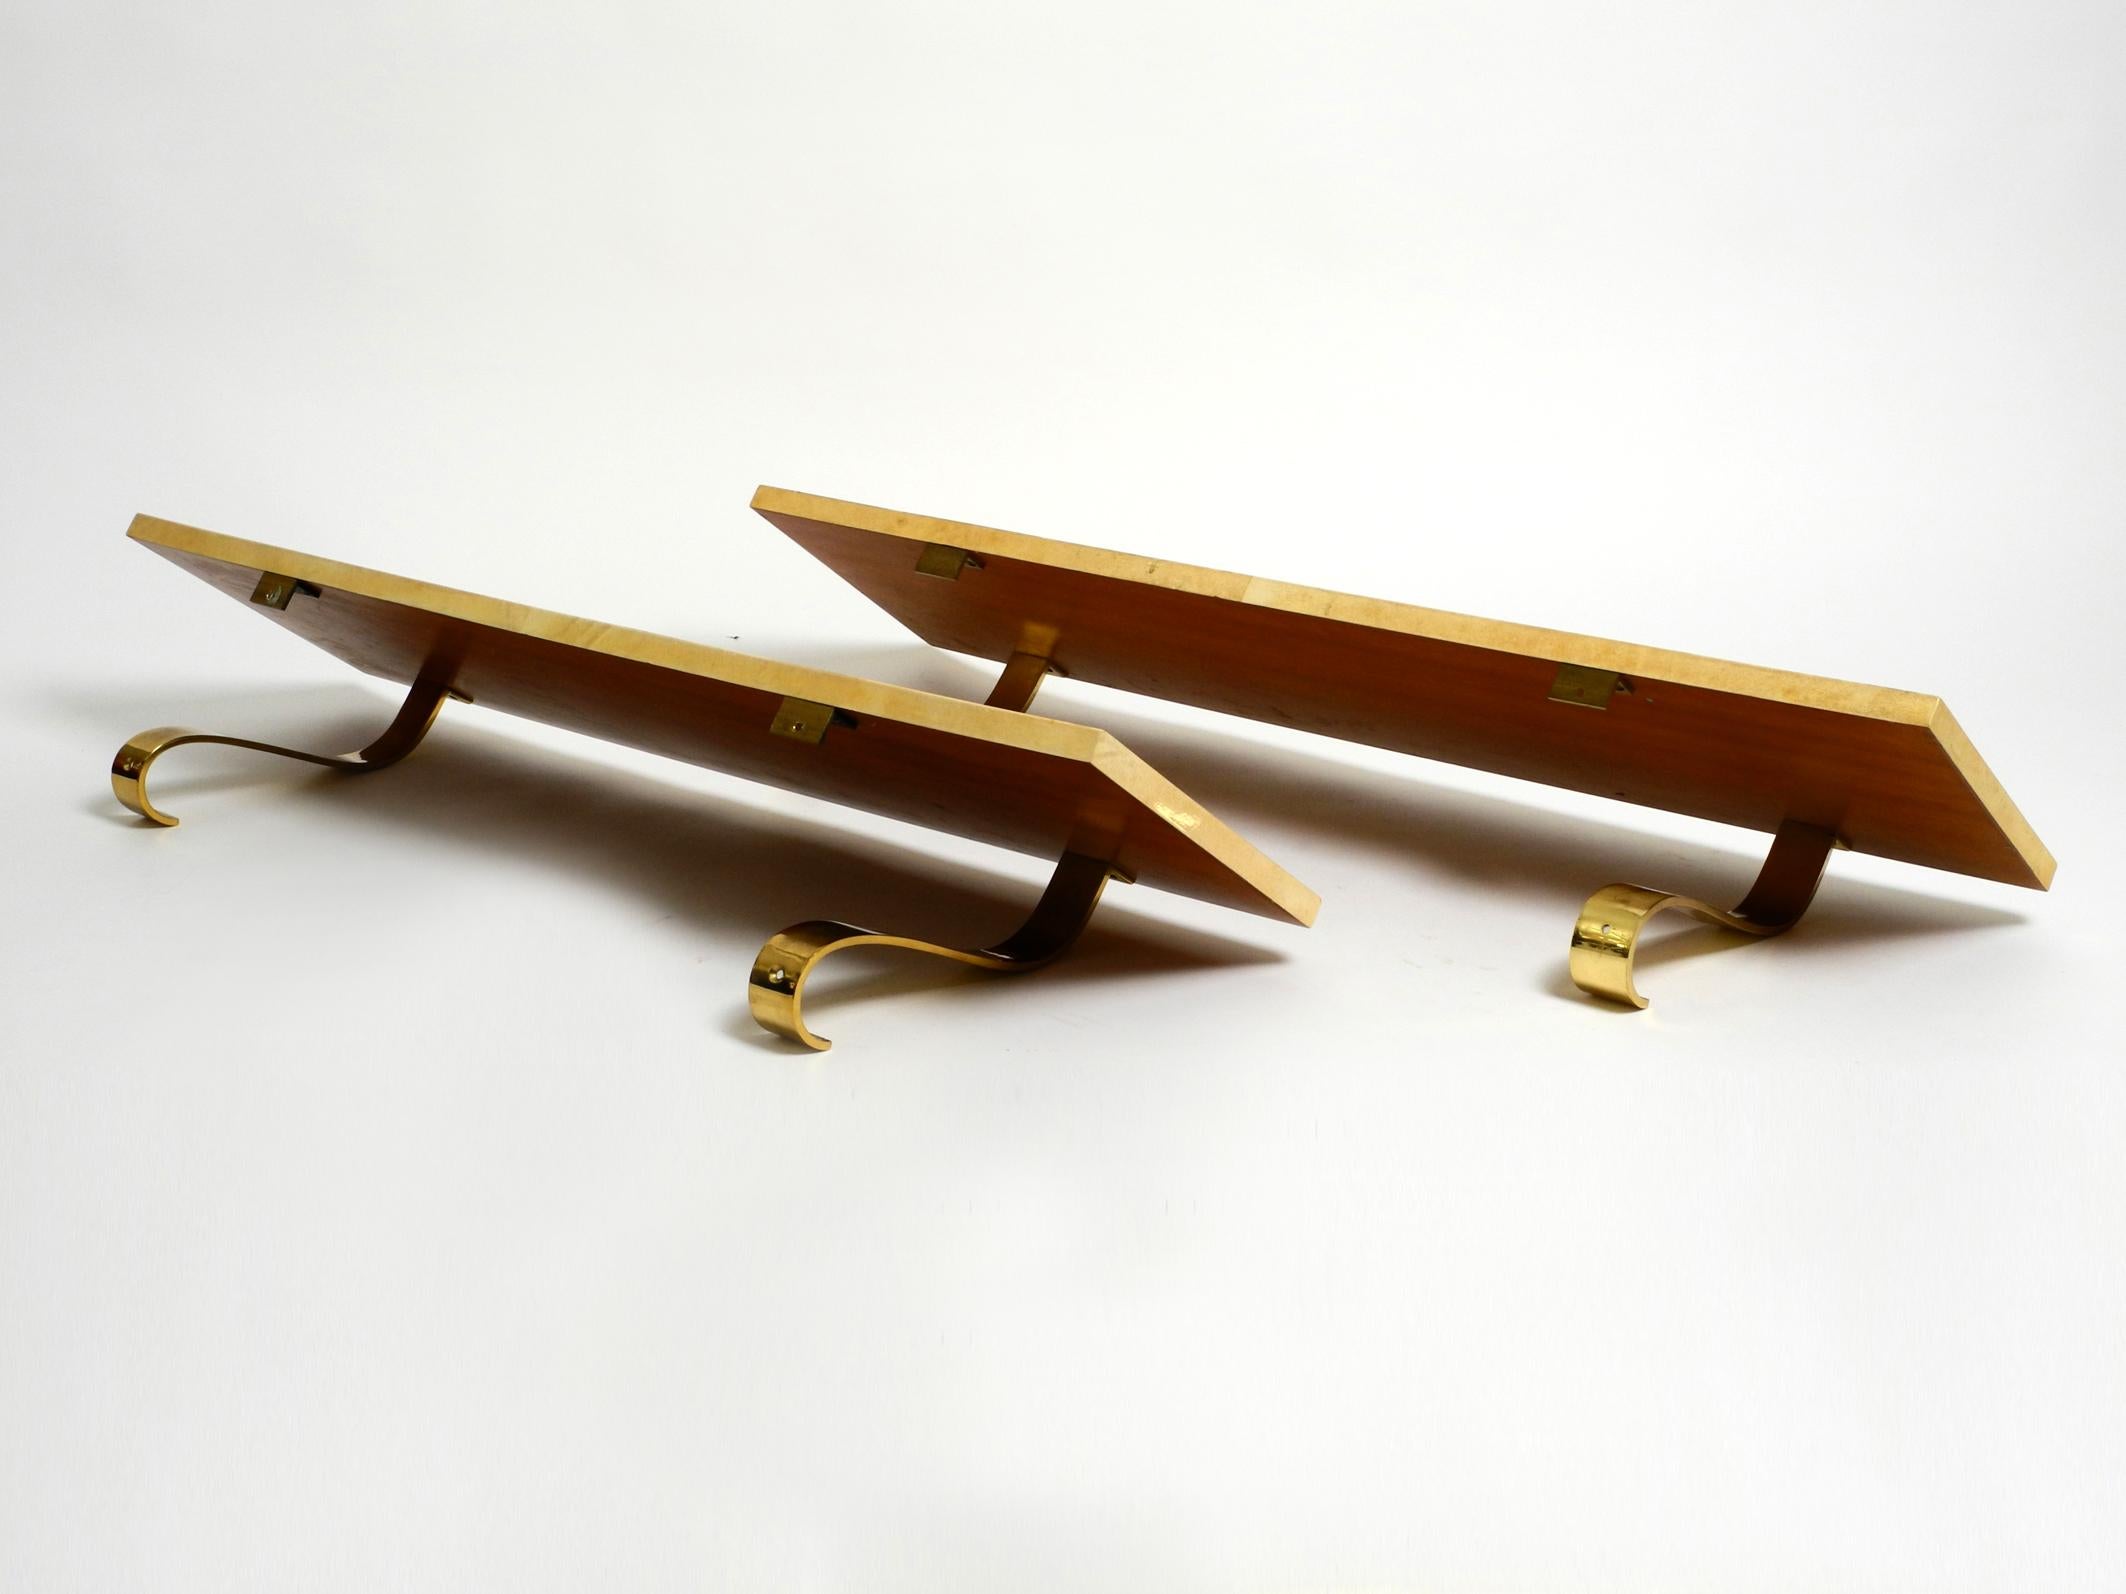 Two Beautiful, Very Rare 1960s Large Aldo Tura Shelves Made of Wood and Goatskin For Sale 11